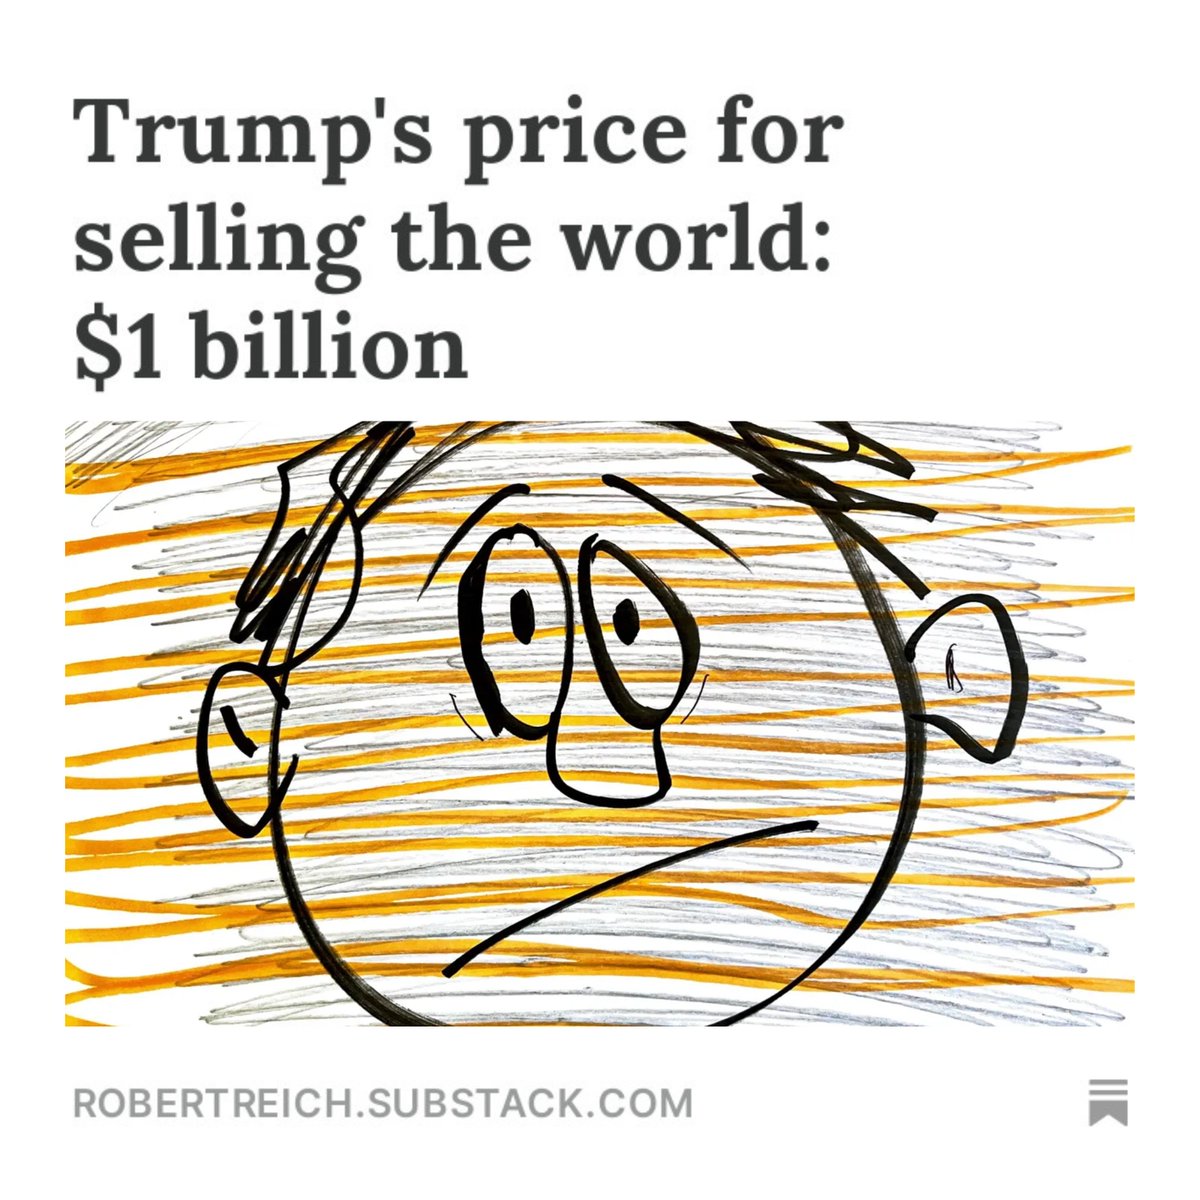 Trump is selling everything to raise money for himself and his campaign: The Trump Bible Trump shoes Trump NFTs But now, Trump is selling something far, far bigger. He’s selling the entire world in exchange for Big Oil's support. bit.ly/3yaWL2G